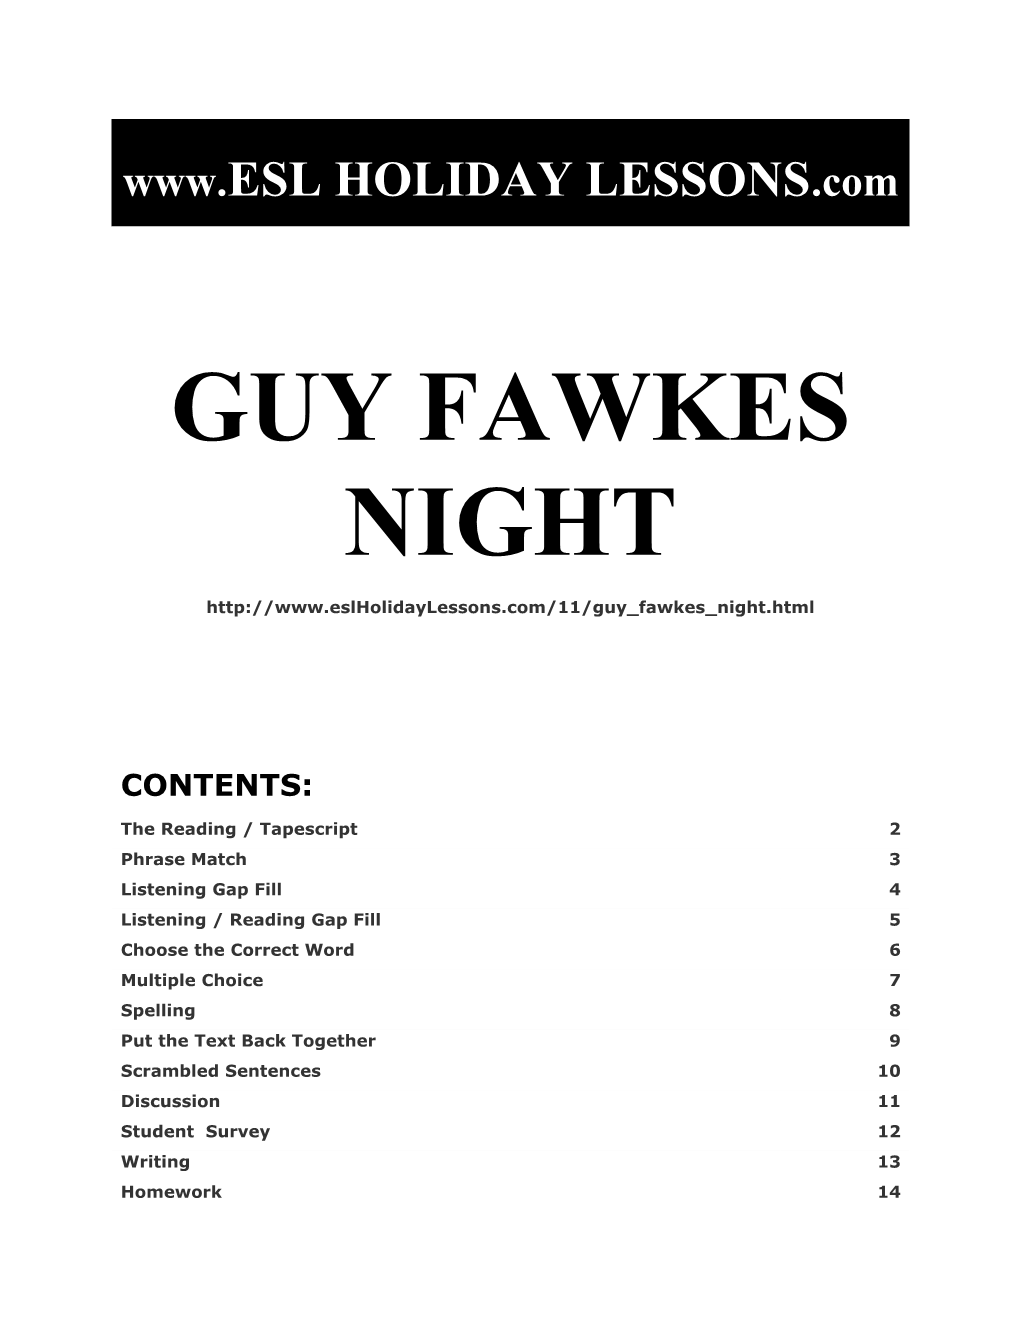 Holiday Lessons - Guy Fawkes Night